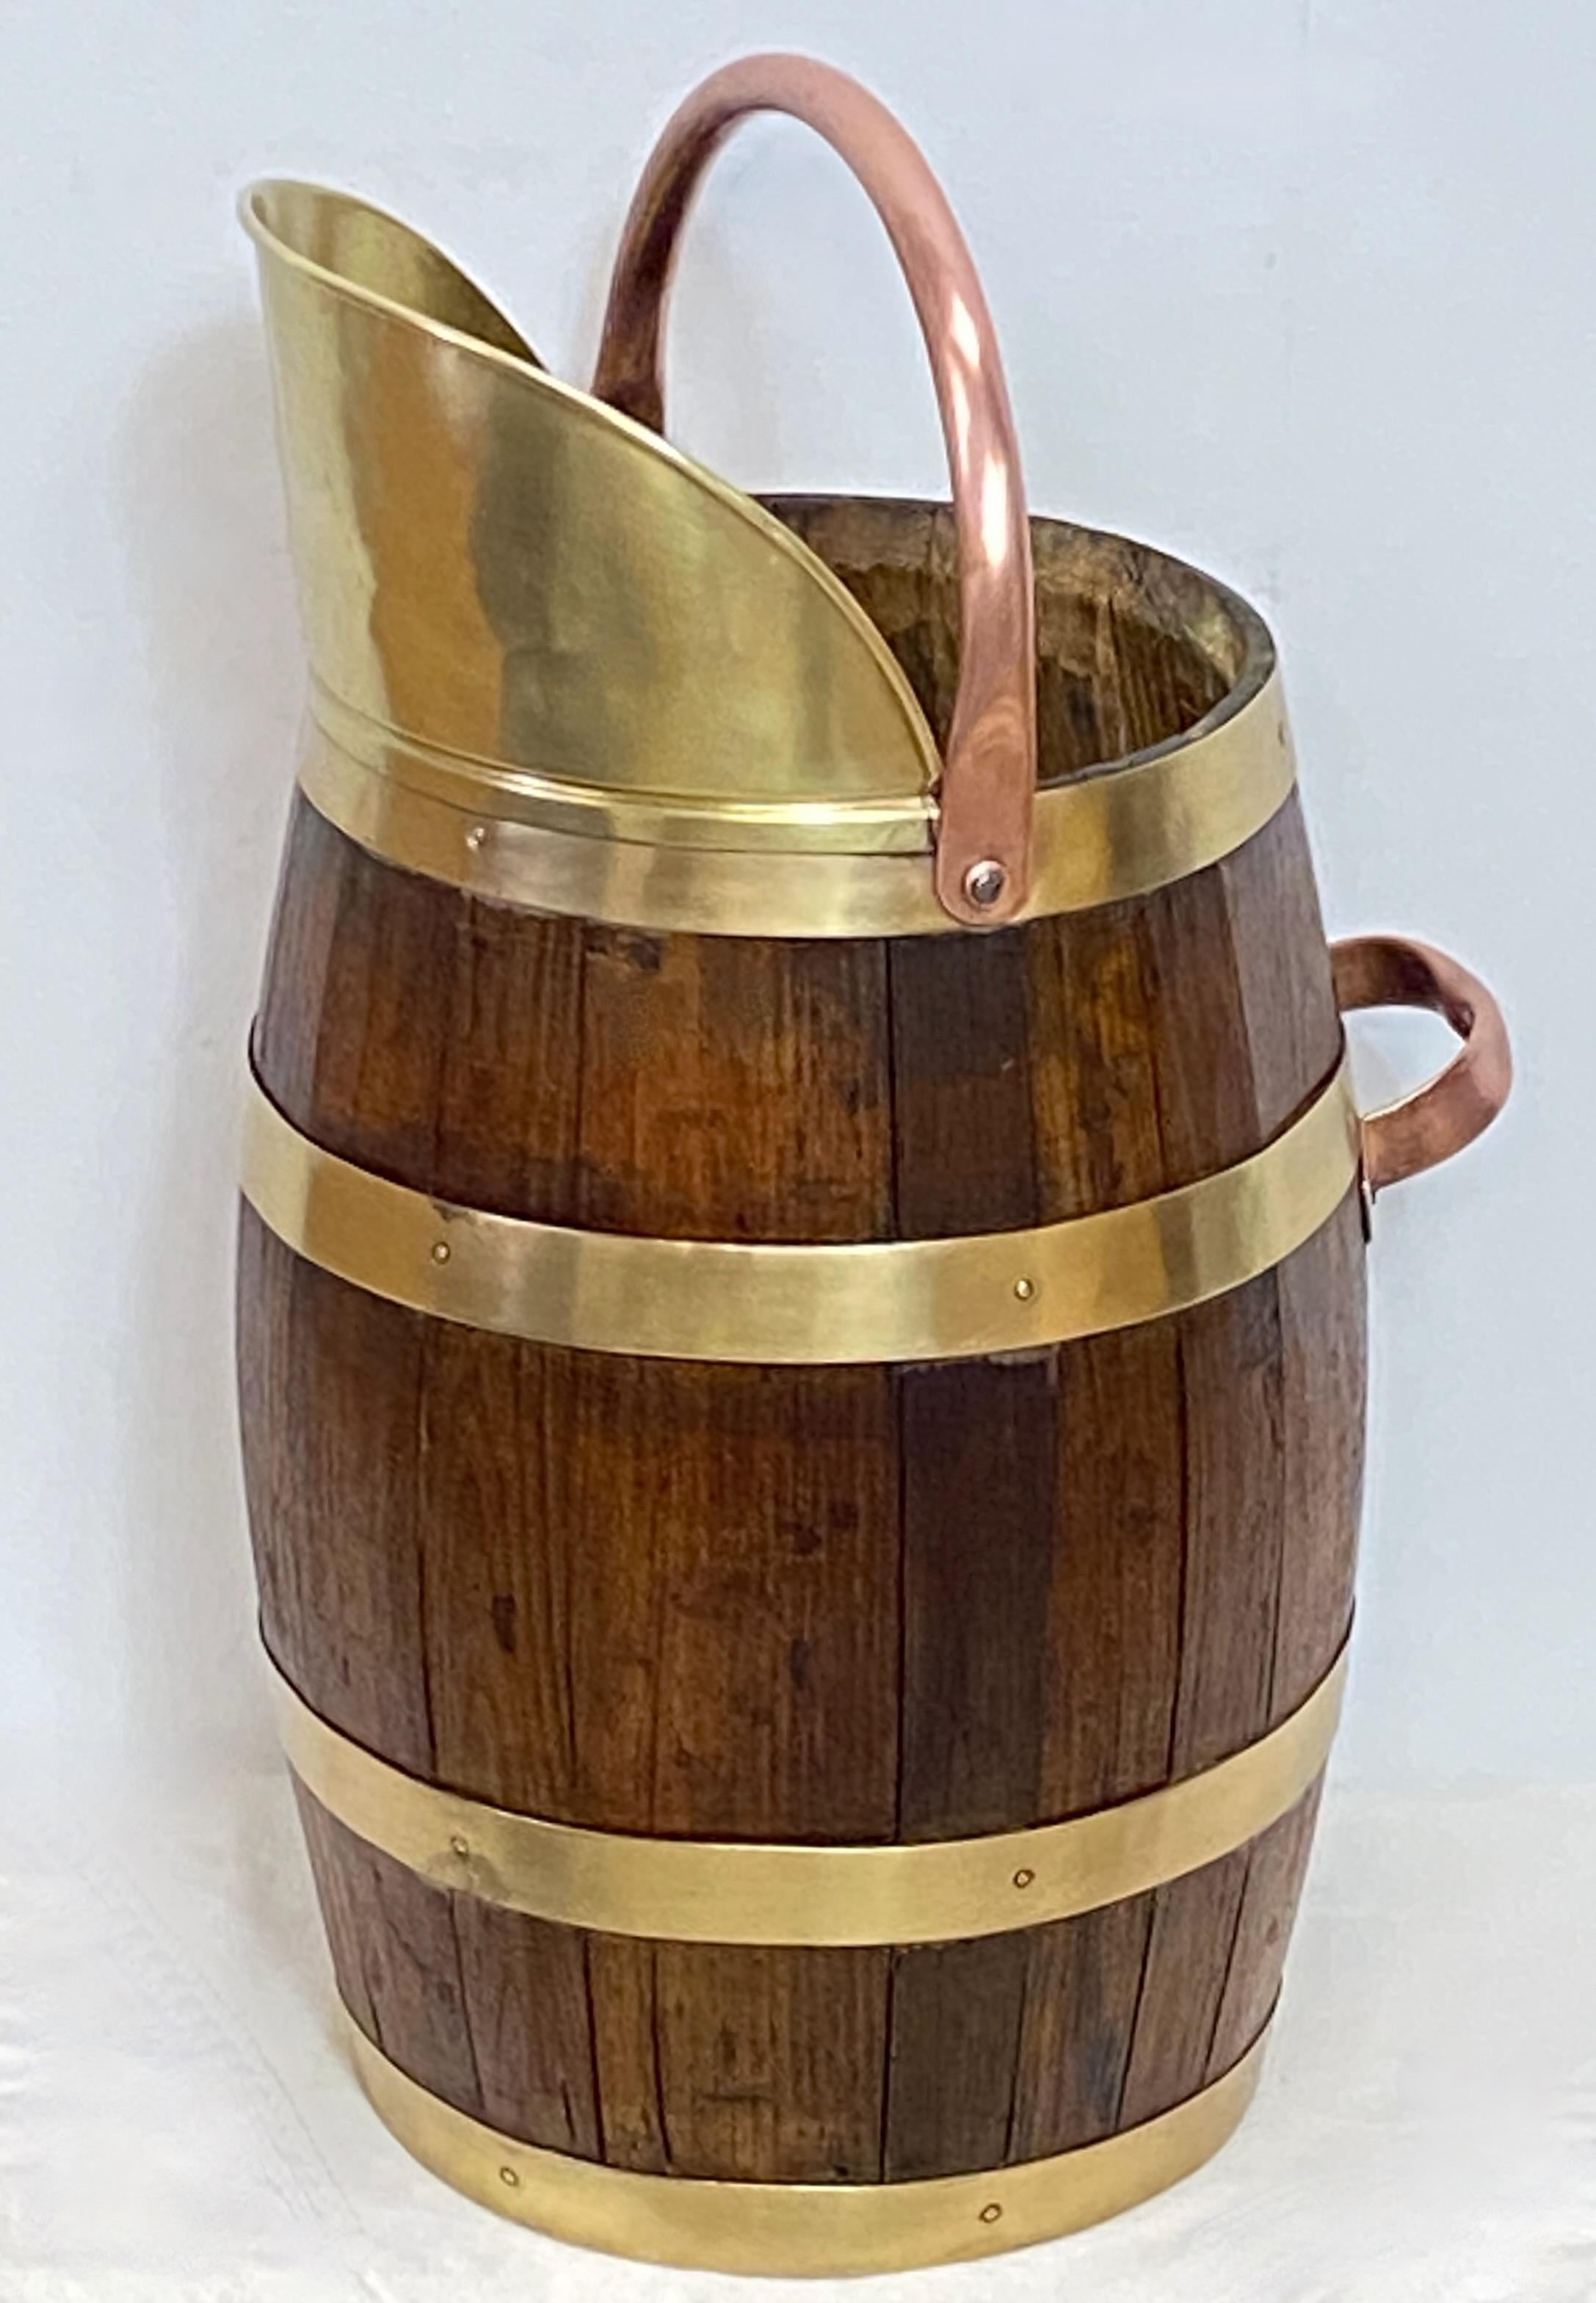 Wonderfully aged oak bucket or large pitcher with brass banding, handle and spout.
England, Mid-19th Century.